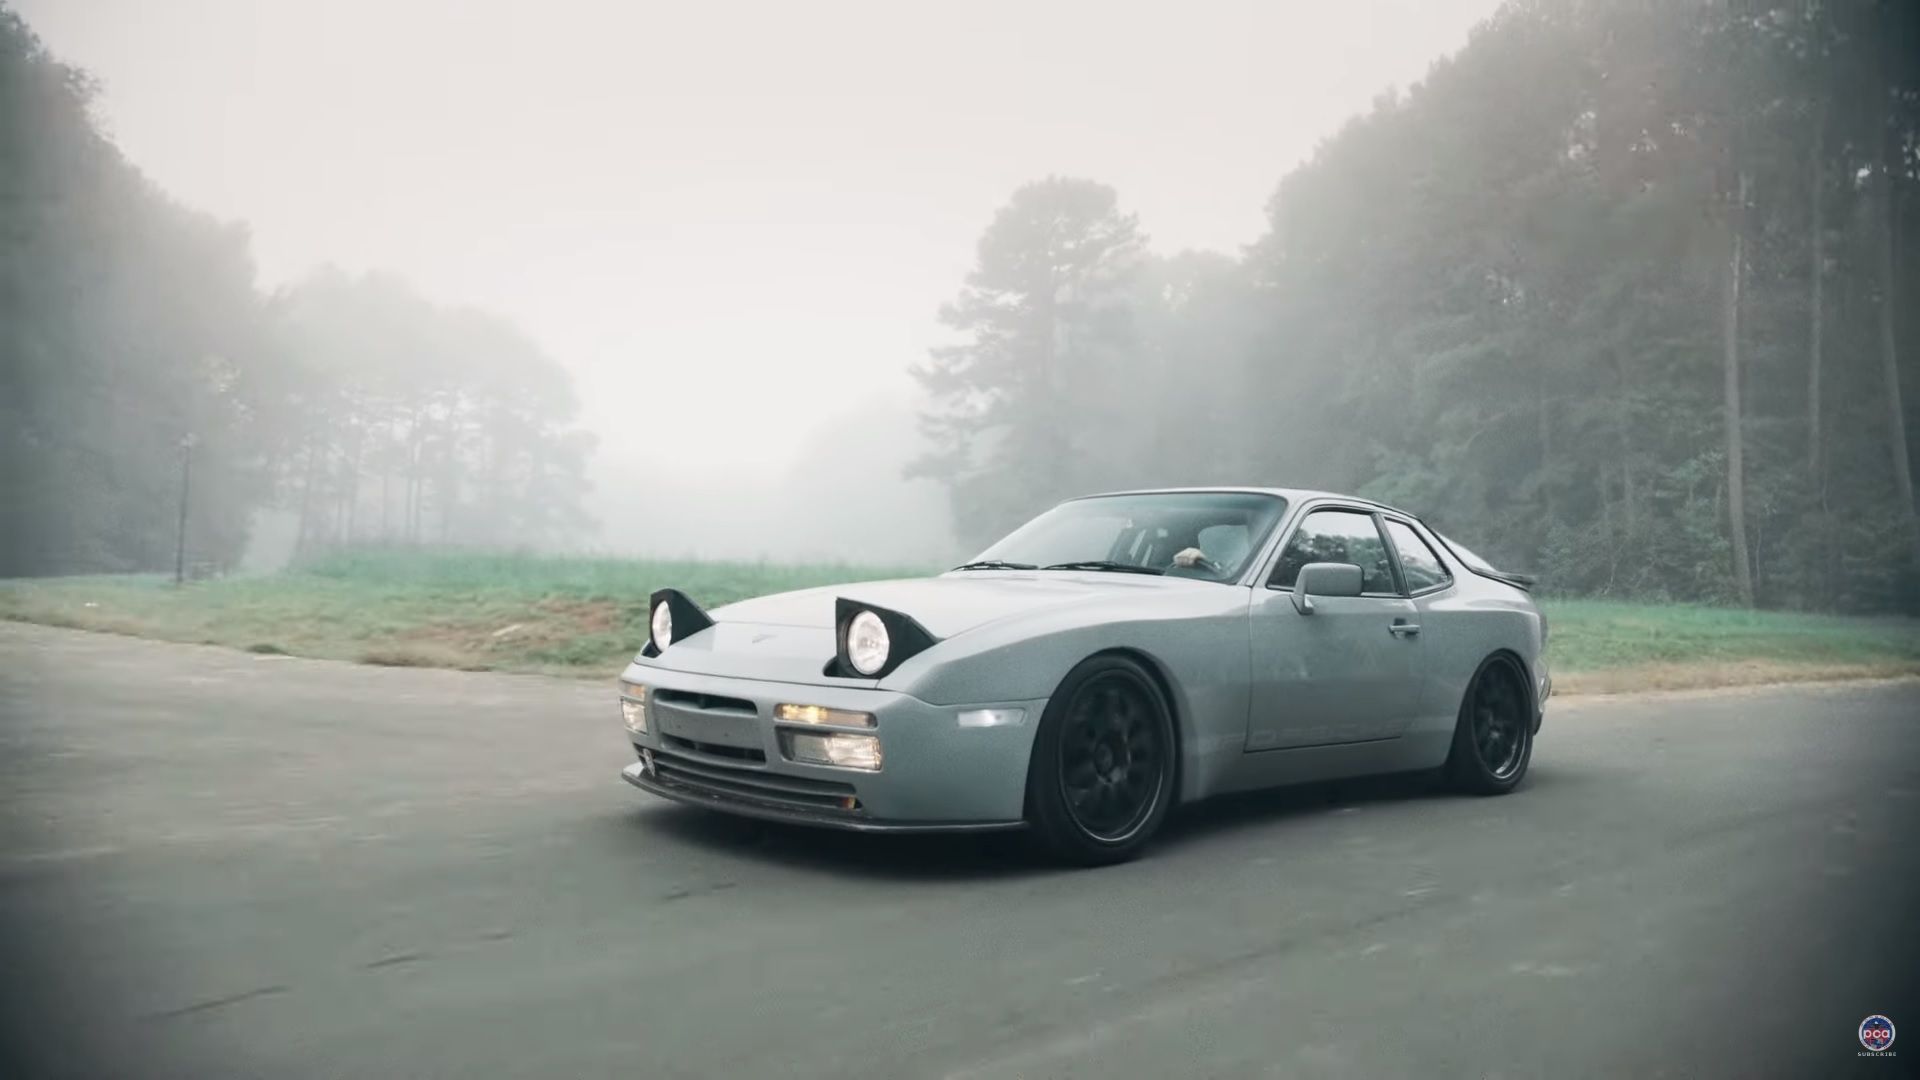 This Is What A $000 Porsche 944 Looks Like